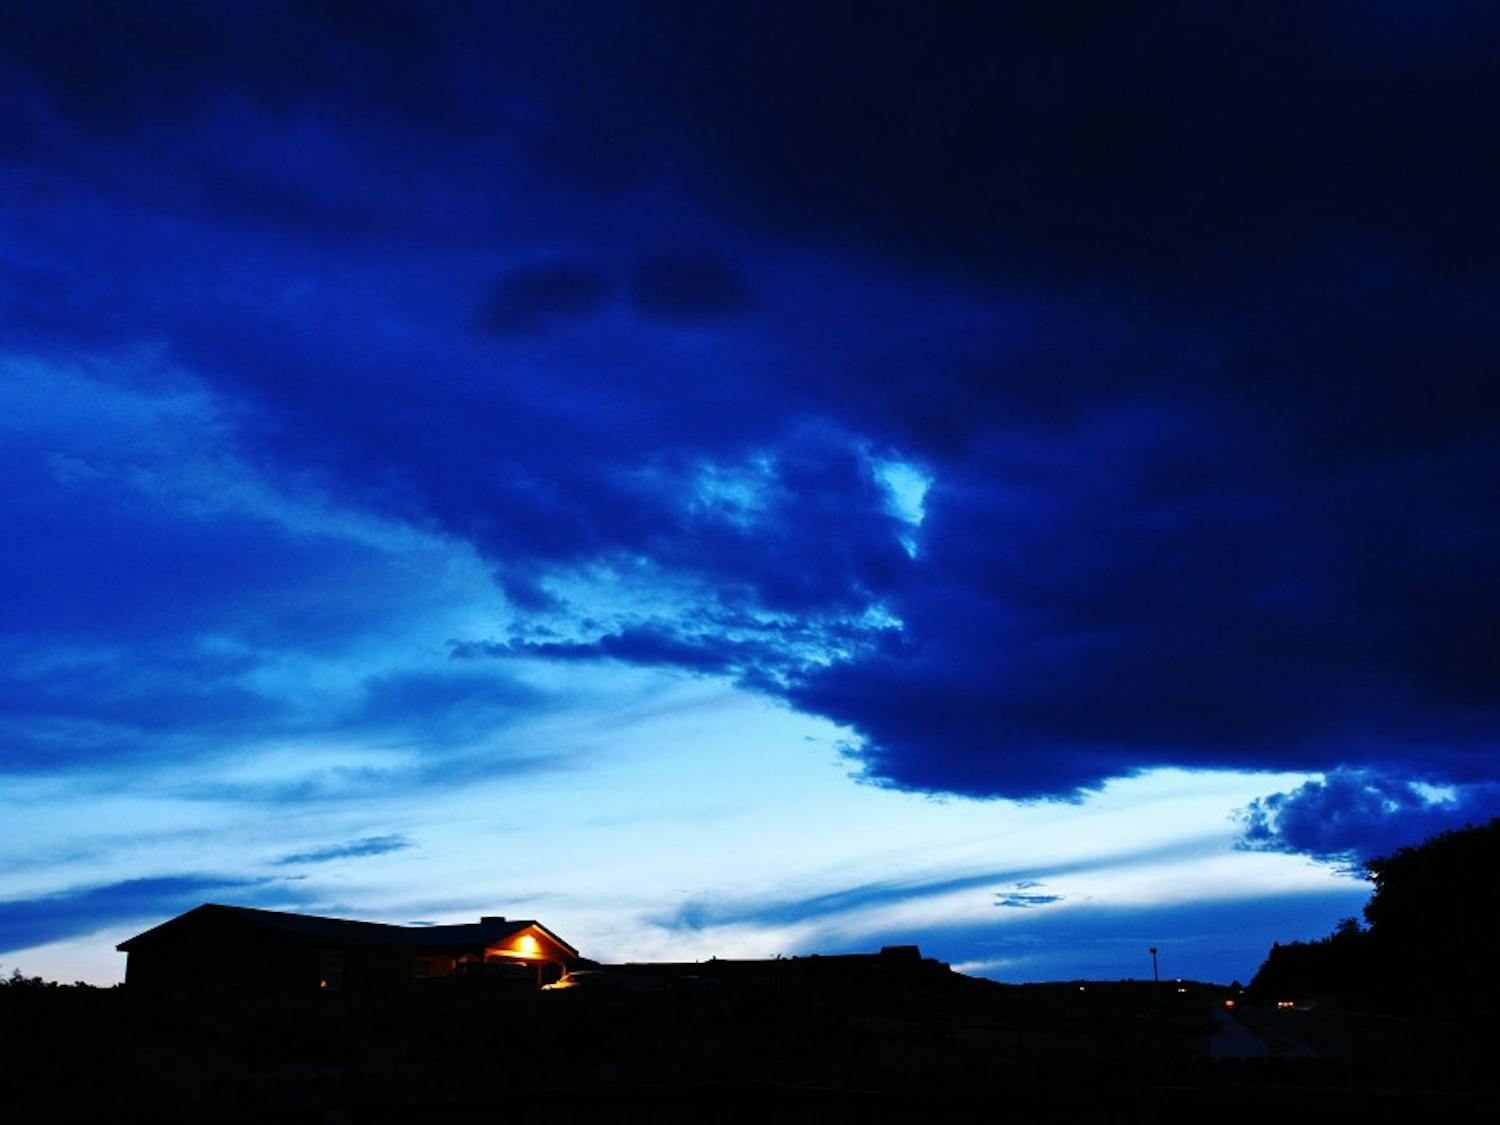 	Abigail Ramirez 
Colliding with the Night 
Colors from a sunset and thunderstorm mix over the Rio Rancho sky, turning the clouds shades of blue and black. The cold breeze made it a nice night to stay indoors by the fire reading a novel. 